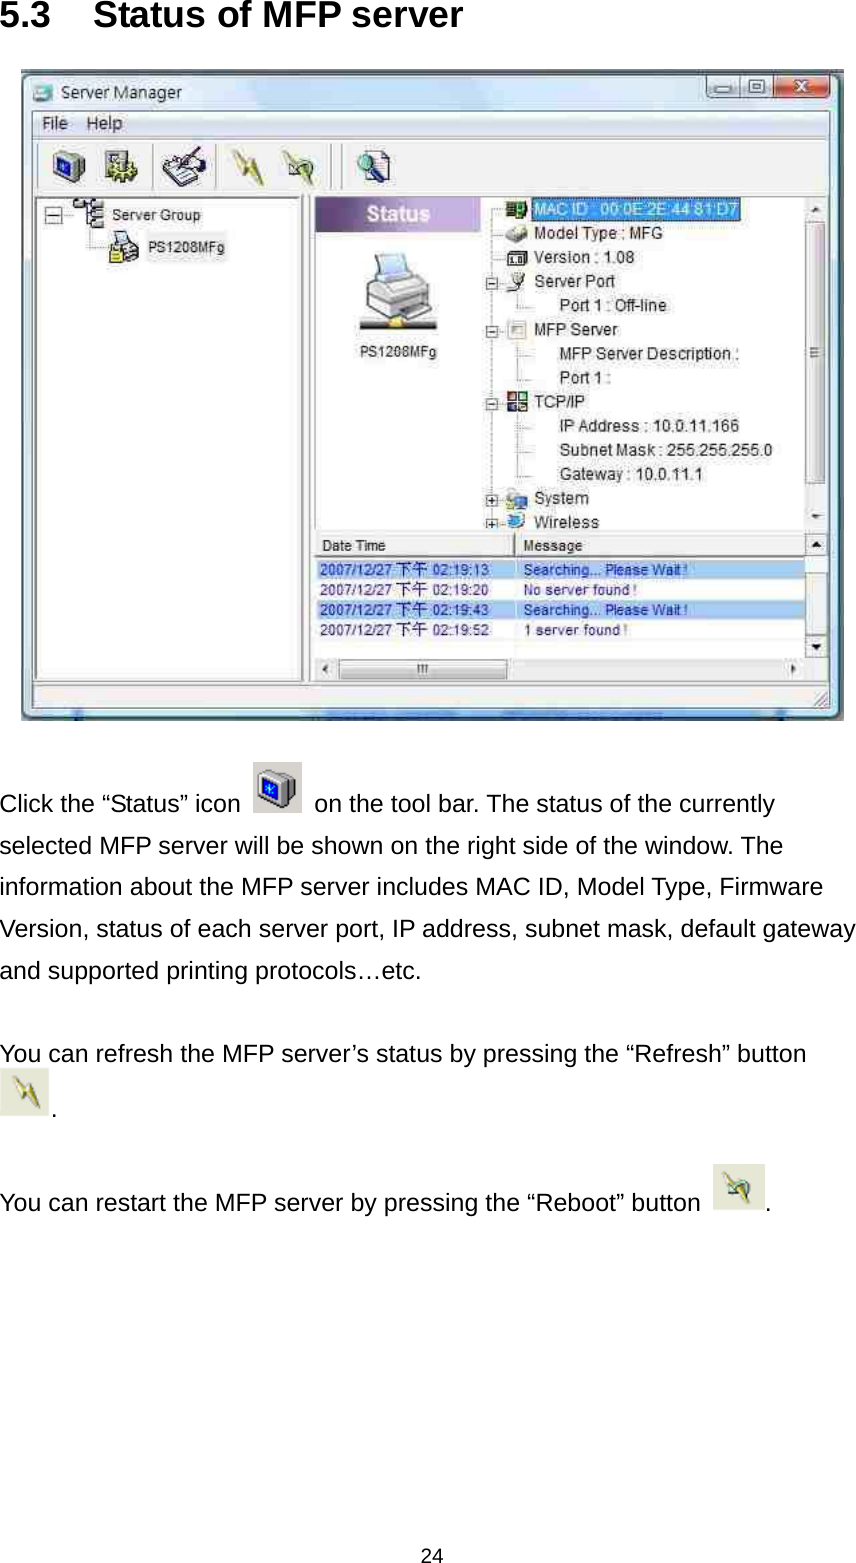 24 5.3  Status of MFP server   Click the “Status” icon    on the tool bar. The status of the currently selected MFP server will be shown on the right side of the window. The information about the MFP server includes MAC ID, Model Type, Firmware Version, status of each server port, IP address, subnet mask, default gateway and supported printing protocols…etc.  You can refresh the MFP server’s status by pressing the “Refresh” button .  You can restart the MFP server by pressing the “Reboot” button  .    